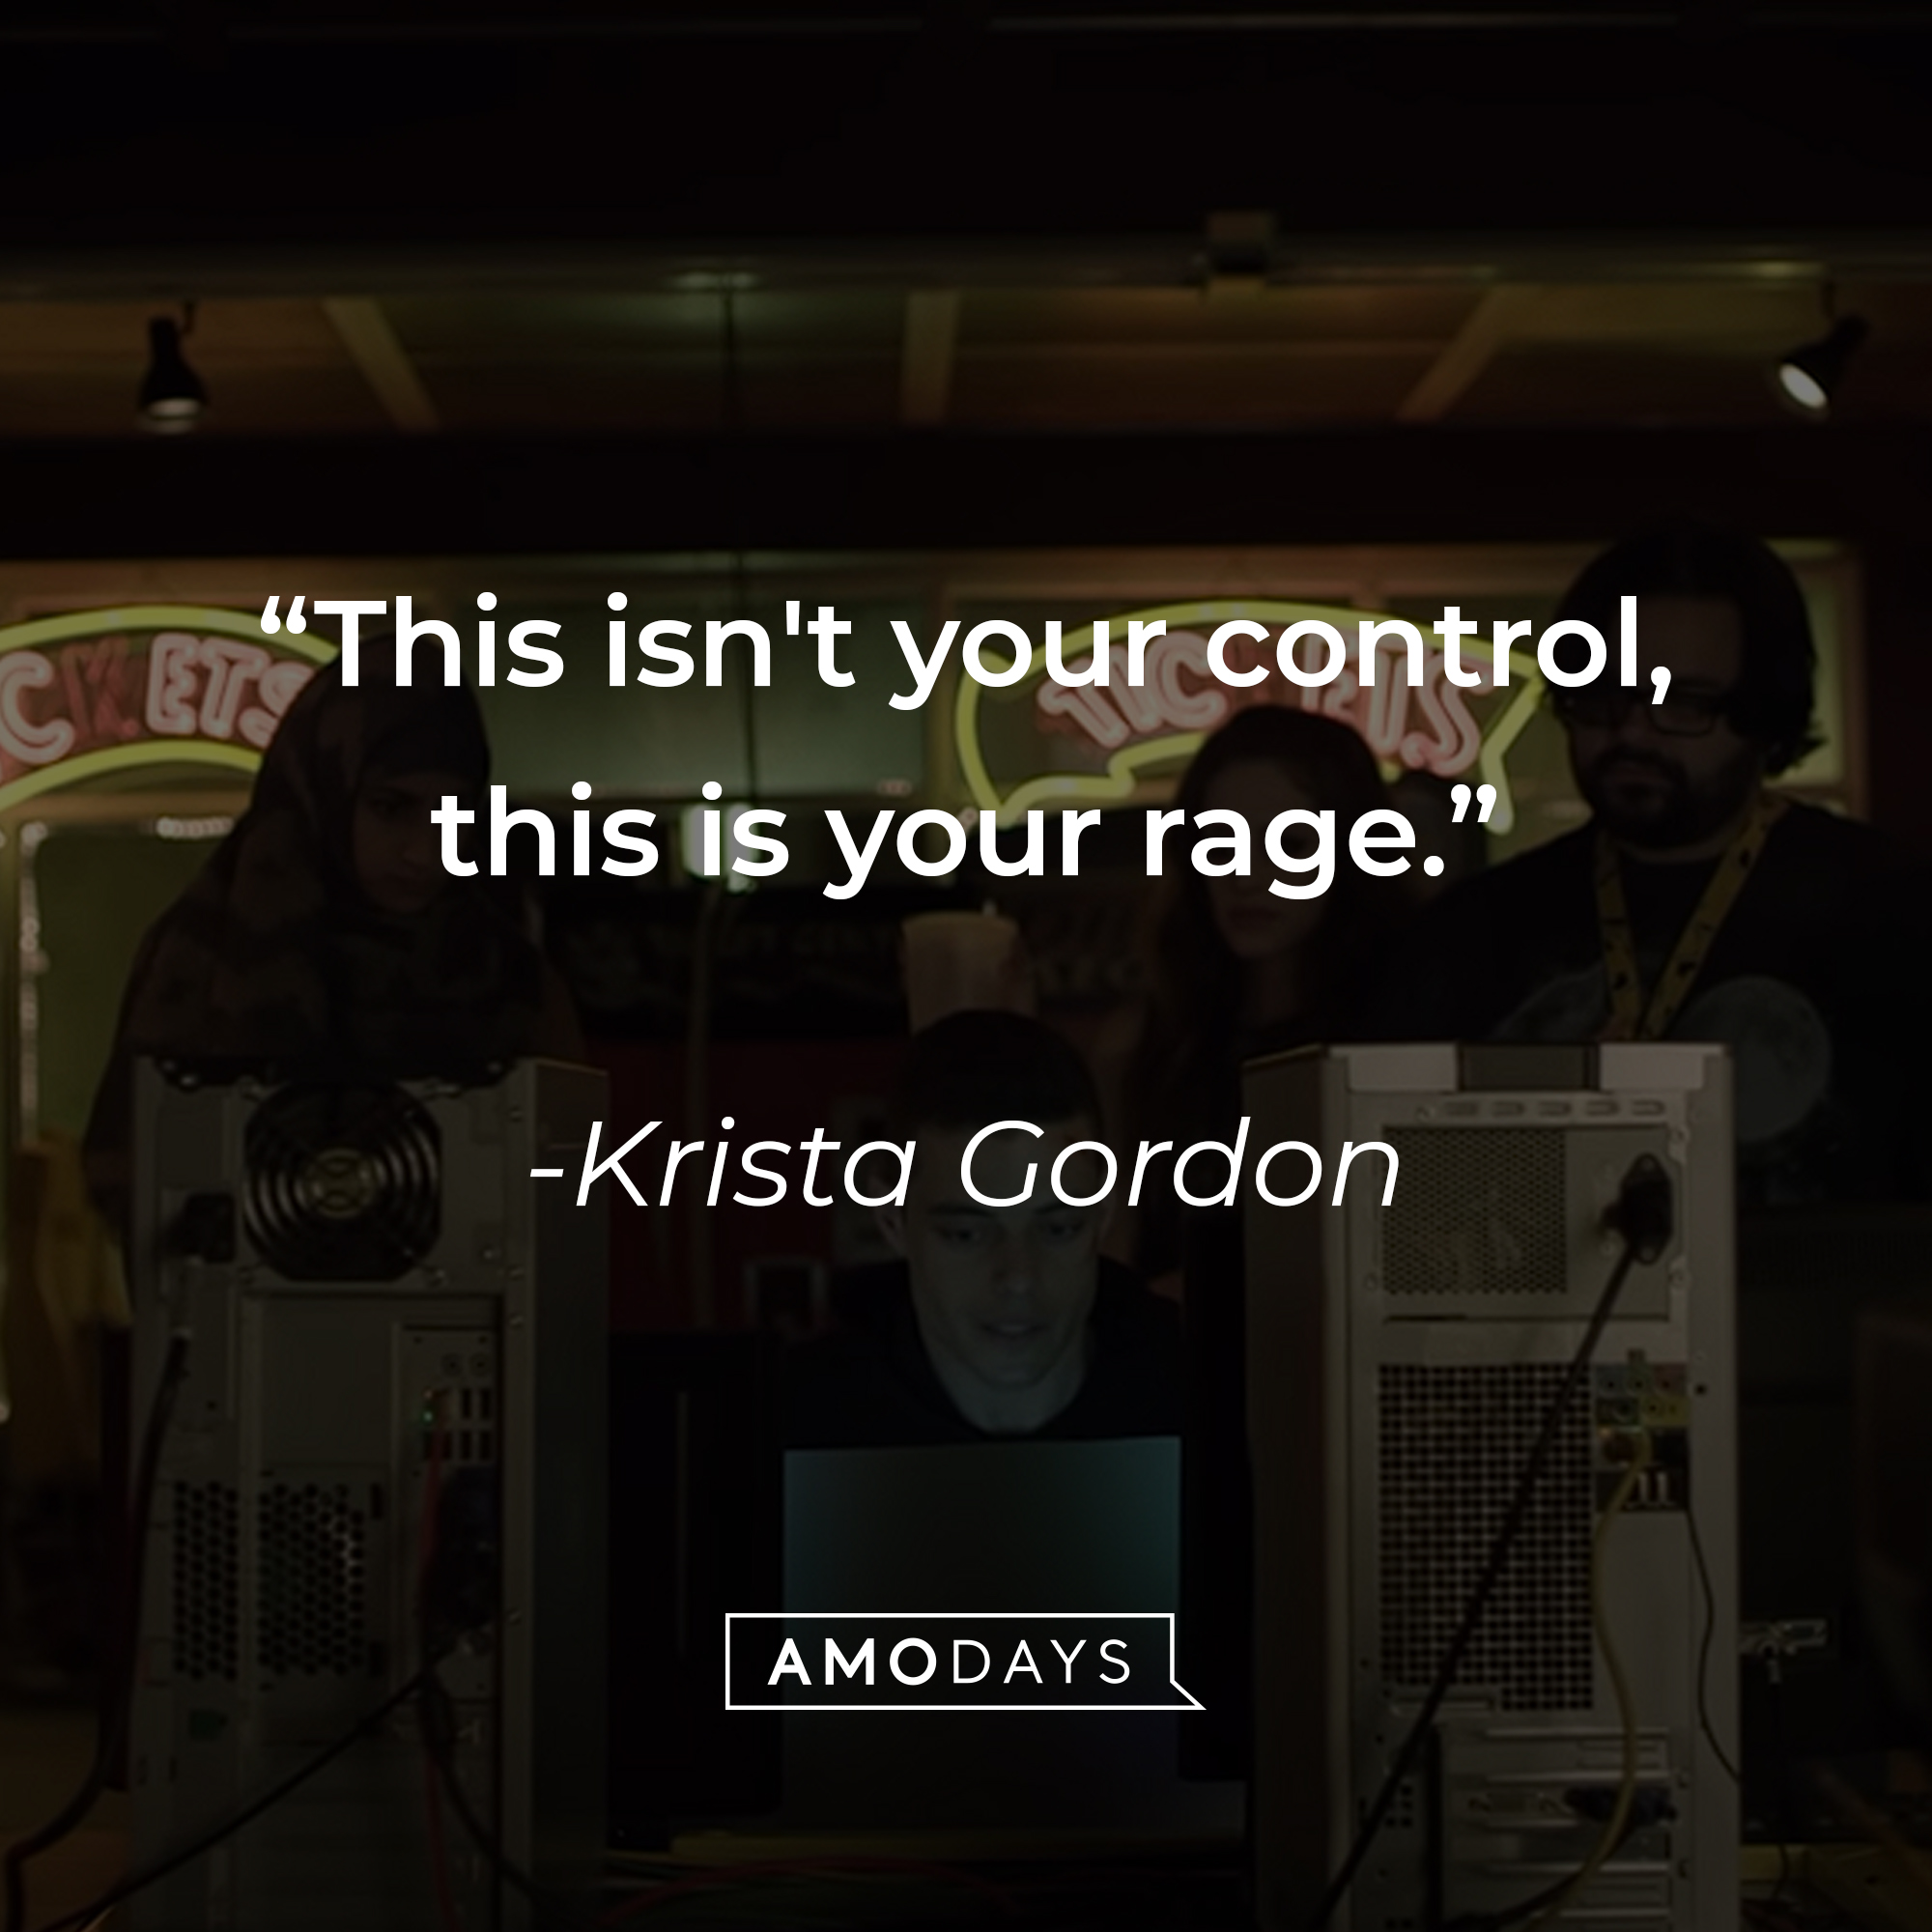 Krista Gordon's quote: "This isn't your control, this is your rage." | Source: youtube.com/MrRobot